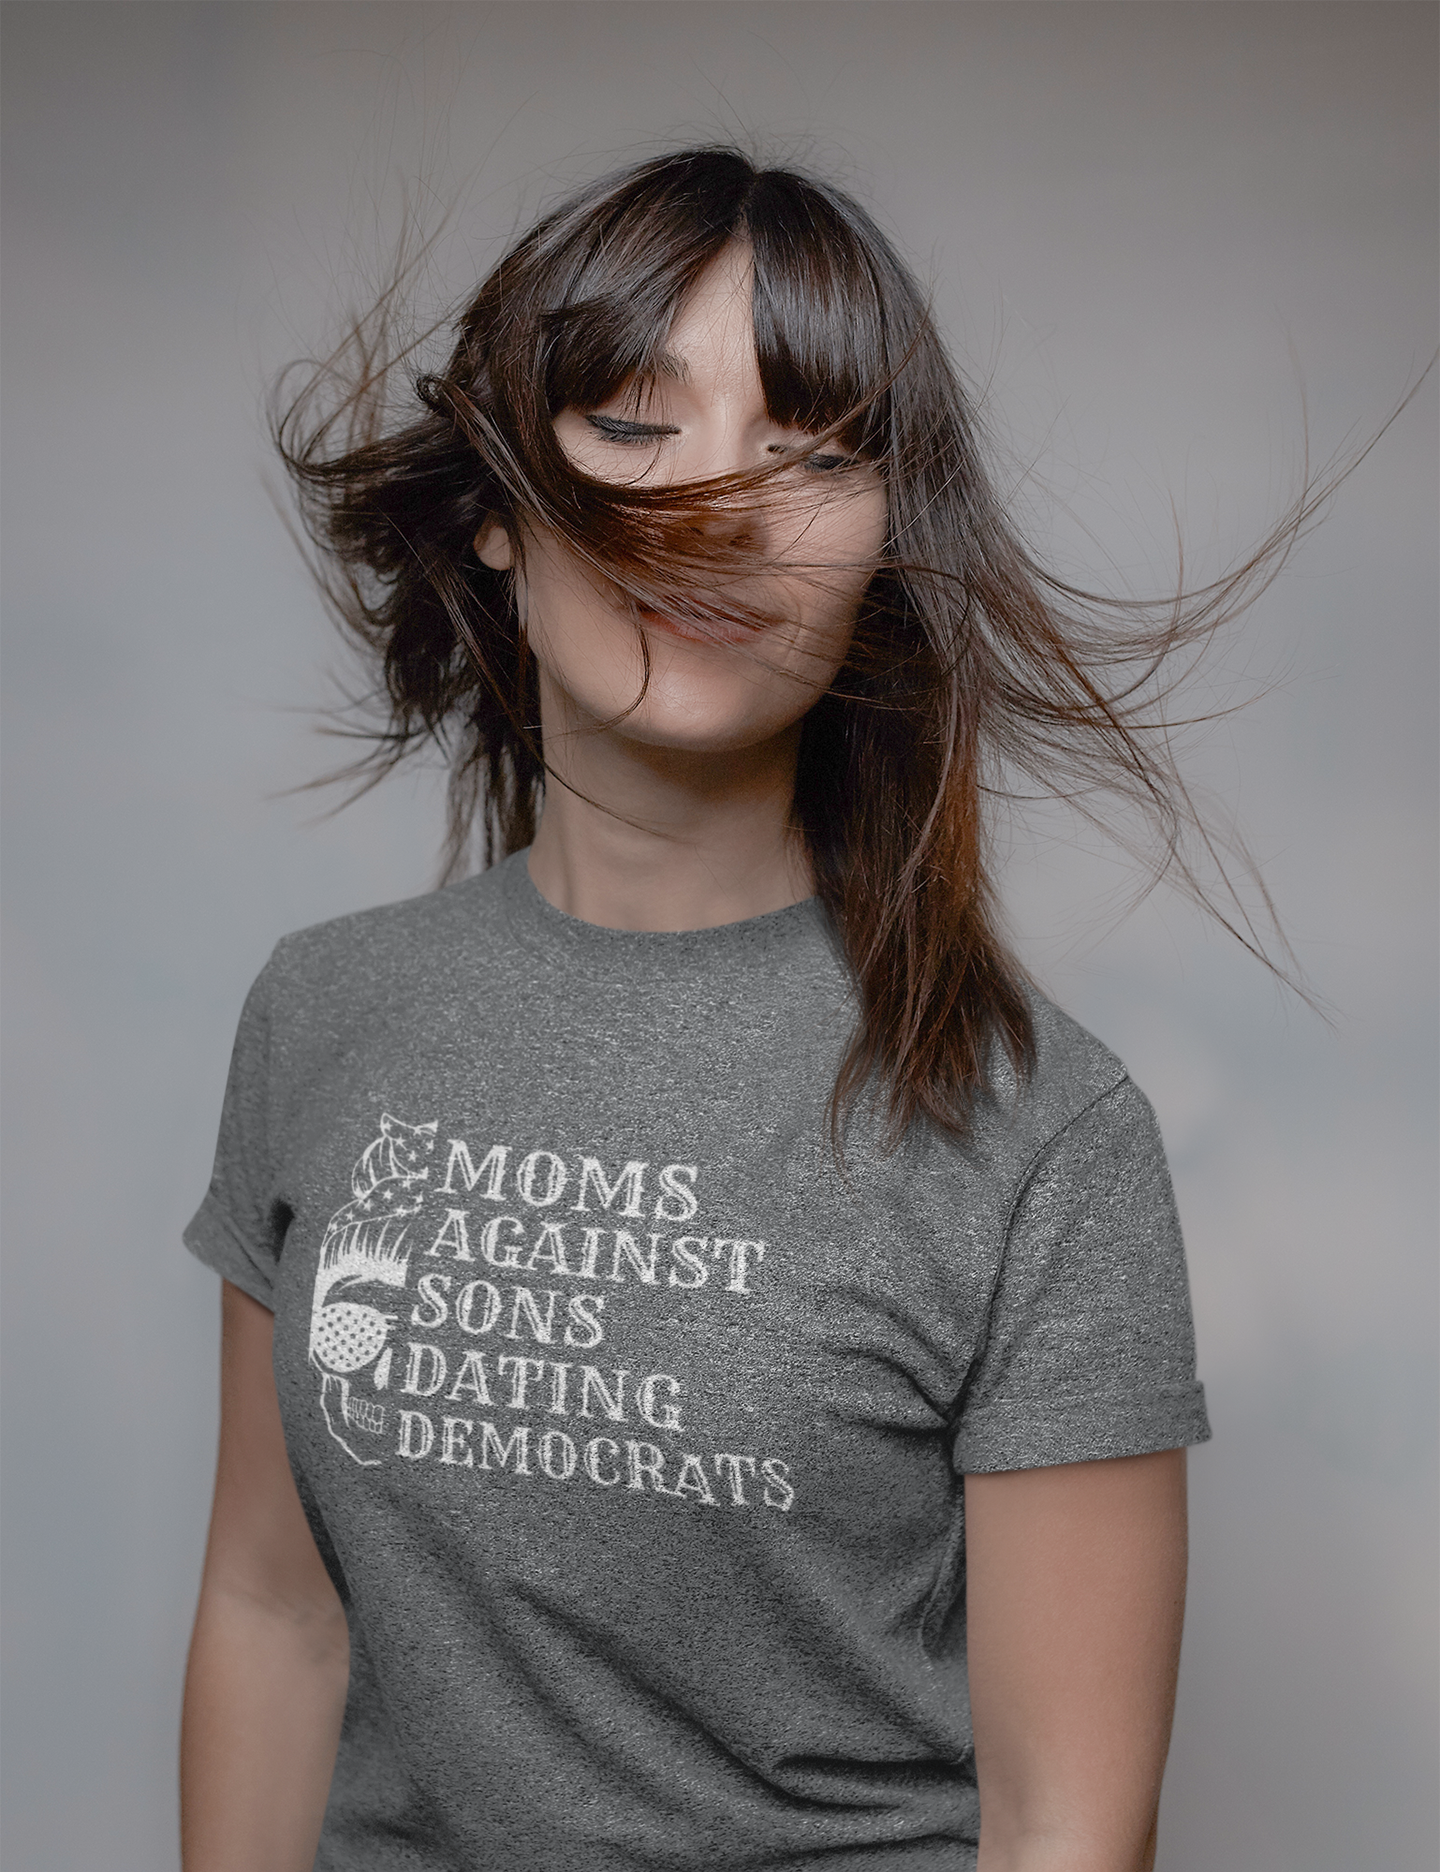 Moms Against Sons Dating Democrats